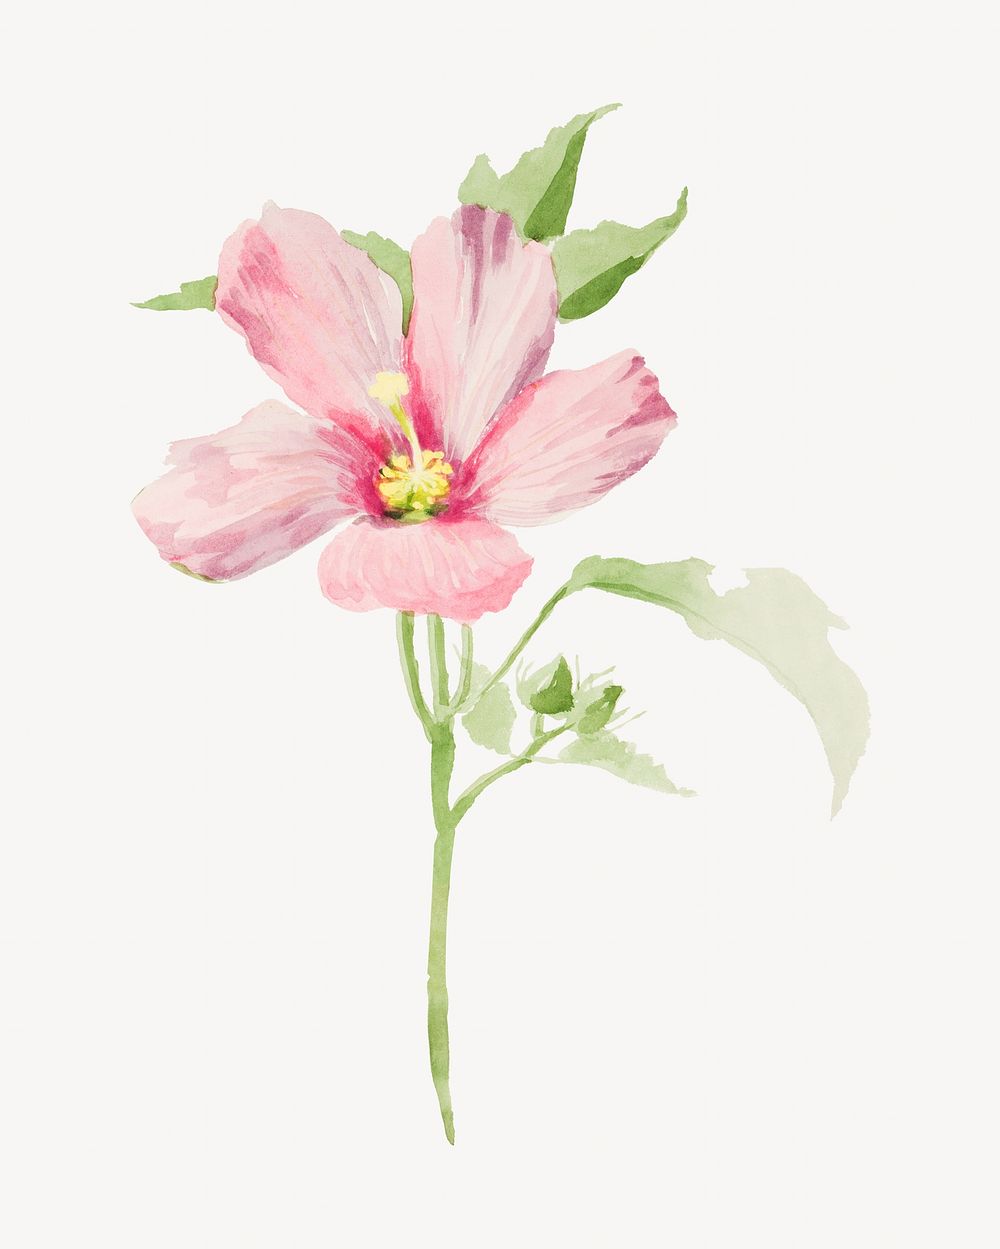 Mallow flower watercolor illustration element. Remixed from vintage artwork by rawpixel.